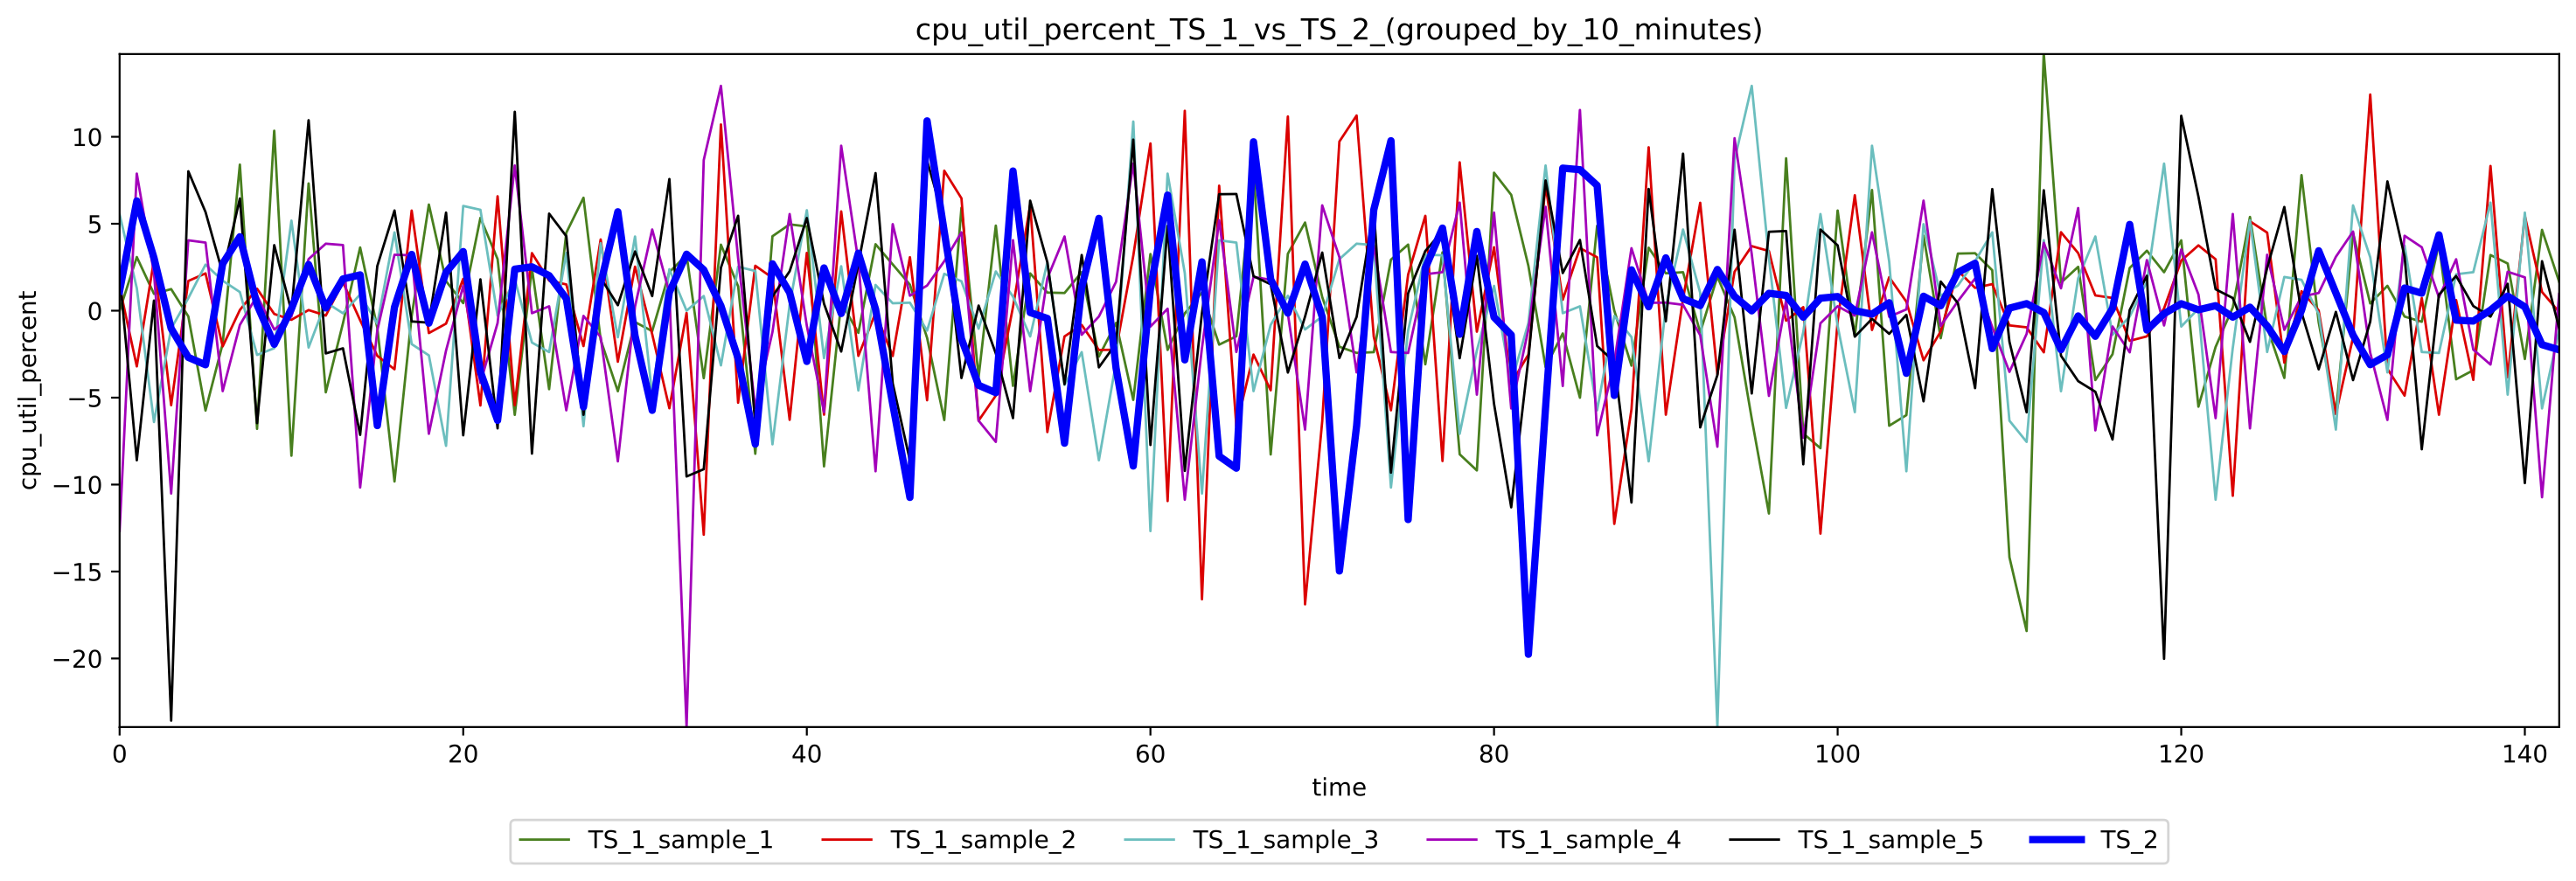 Delta Figure for used CPU percentage grouped by 10 minutes